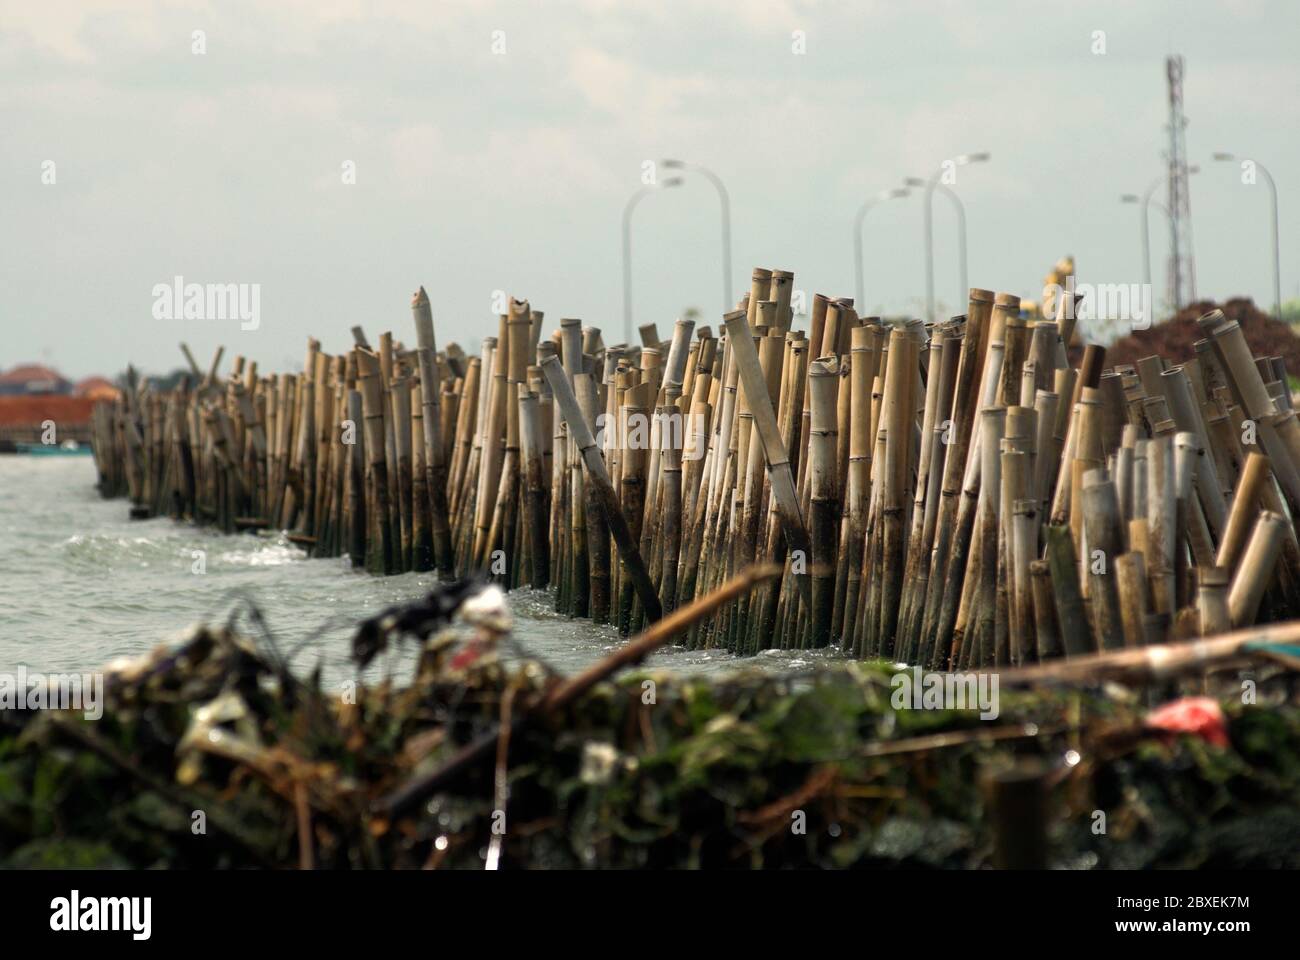 Bamboo poles functioned as a fence and border for land reclamation activity, close to the provincial border between Jakarta and West Java, Indonesia. Stock Photo